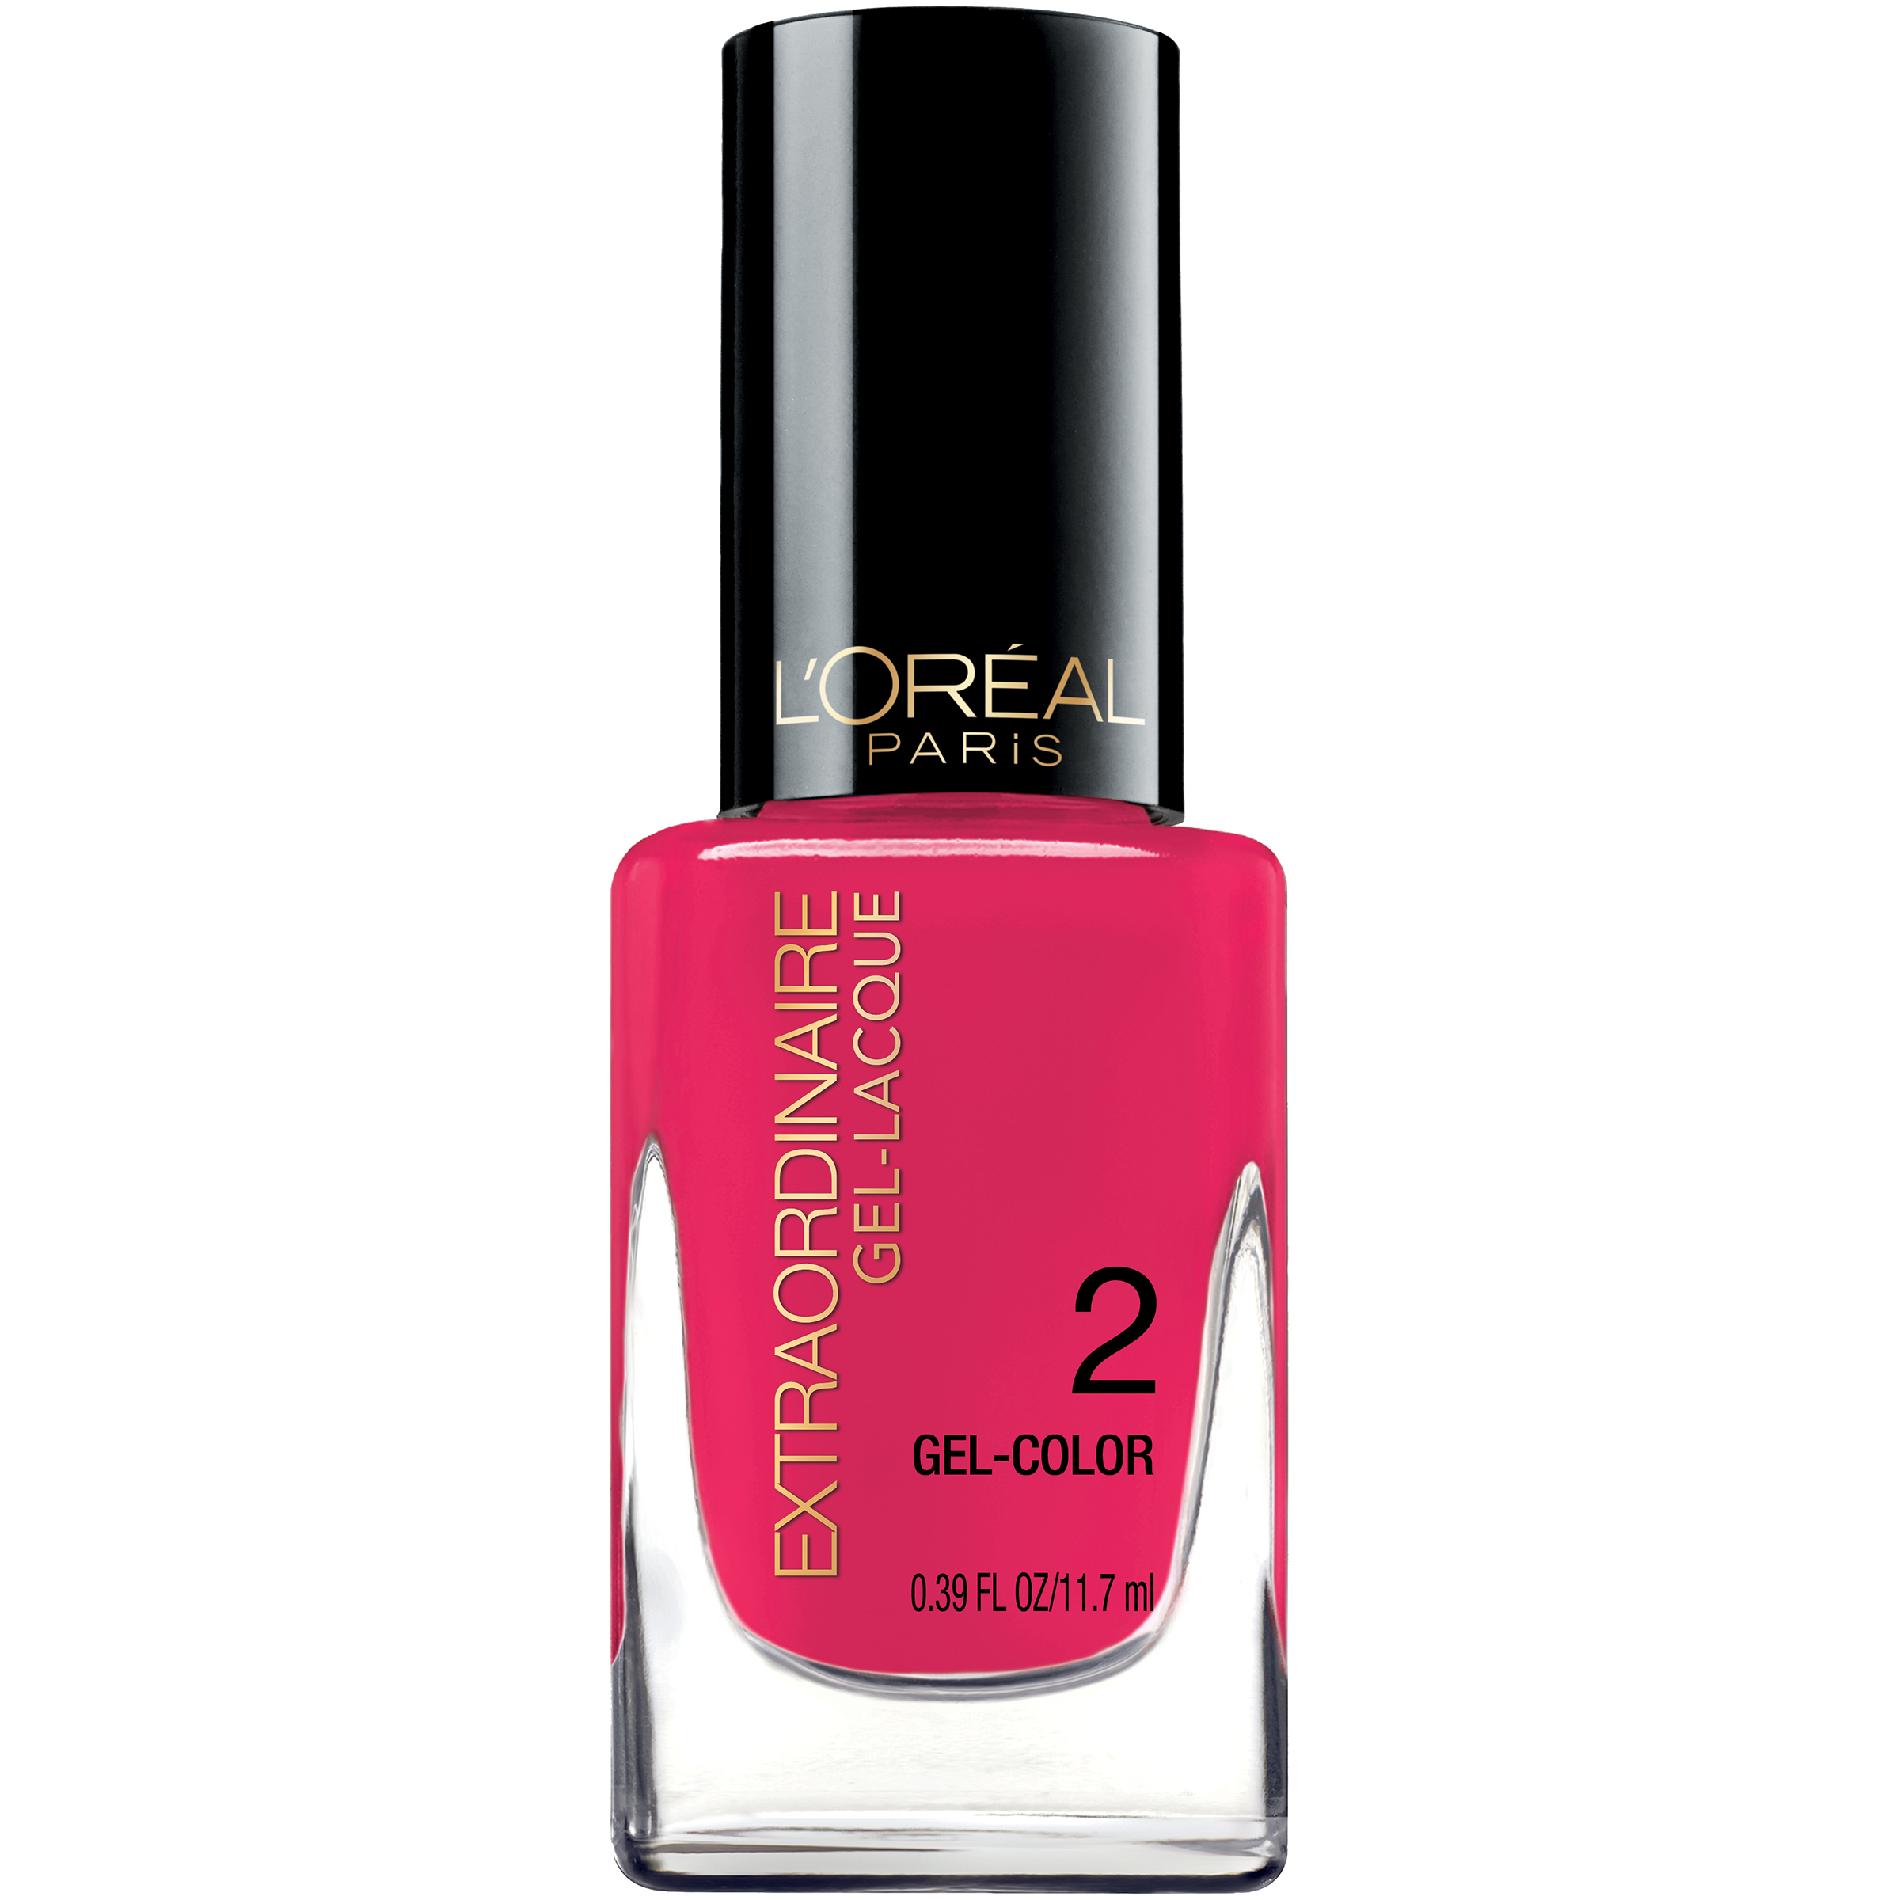 L'Oreal Gel-Lacque 1-2-3 Gel-Color, 704 Brilliant Thinking